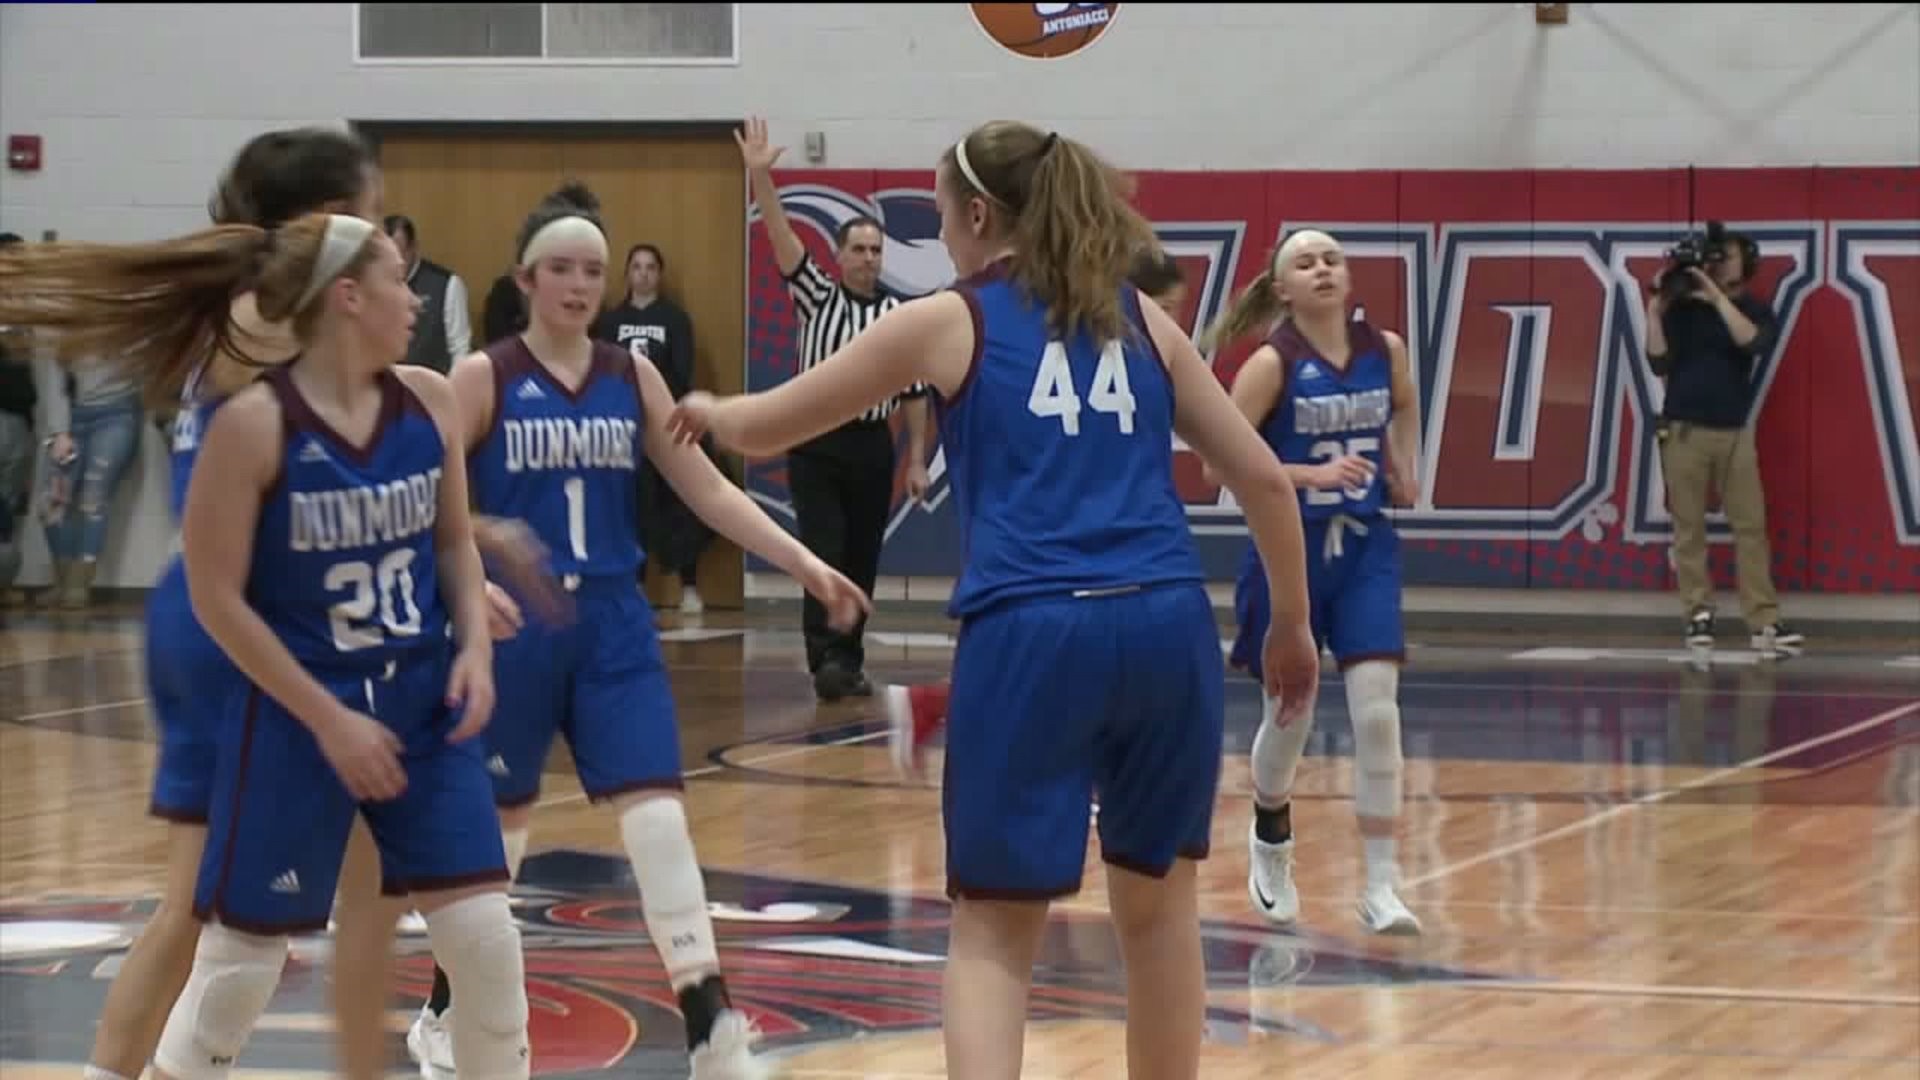 Dunmore Girls Improve to 13-0 Following Win at Riverside